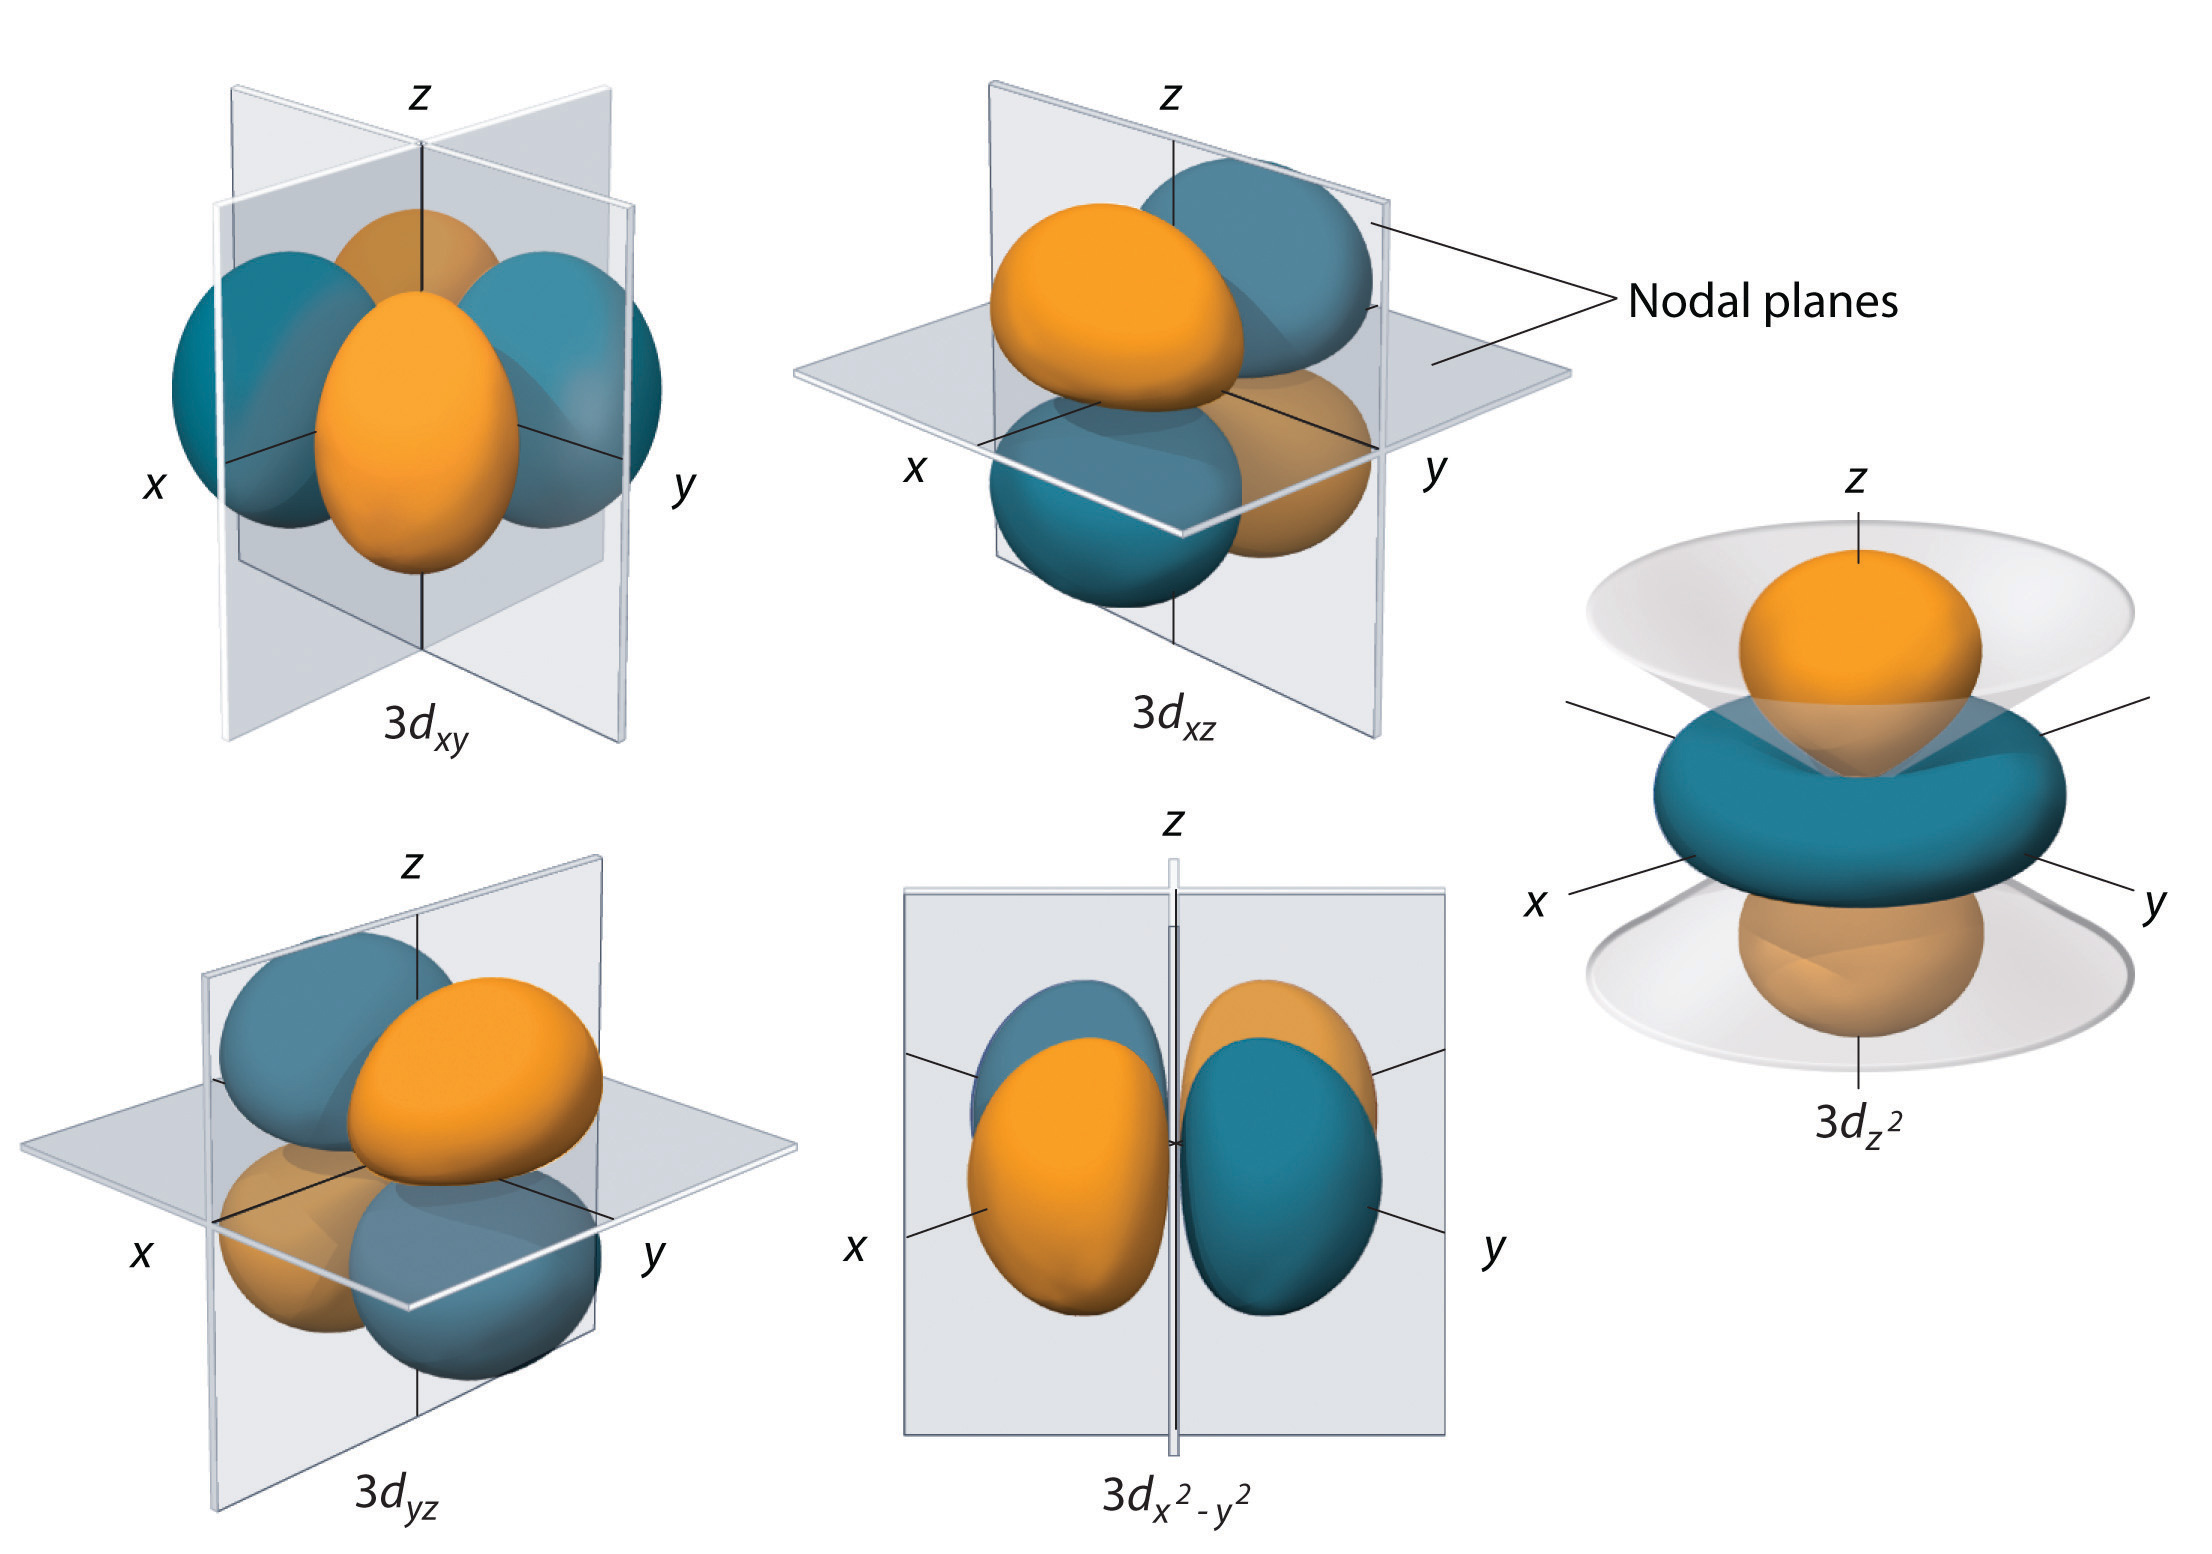 The 3 d orbitals can be broken down into 3 d x y, 3 d x z, 3 d y squared, 3 d x squared minus y squared, 3 d z squared. 